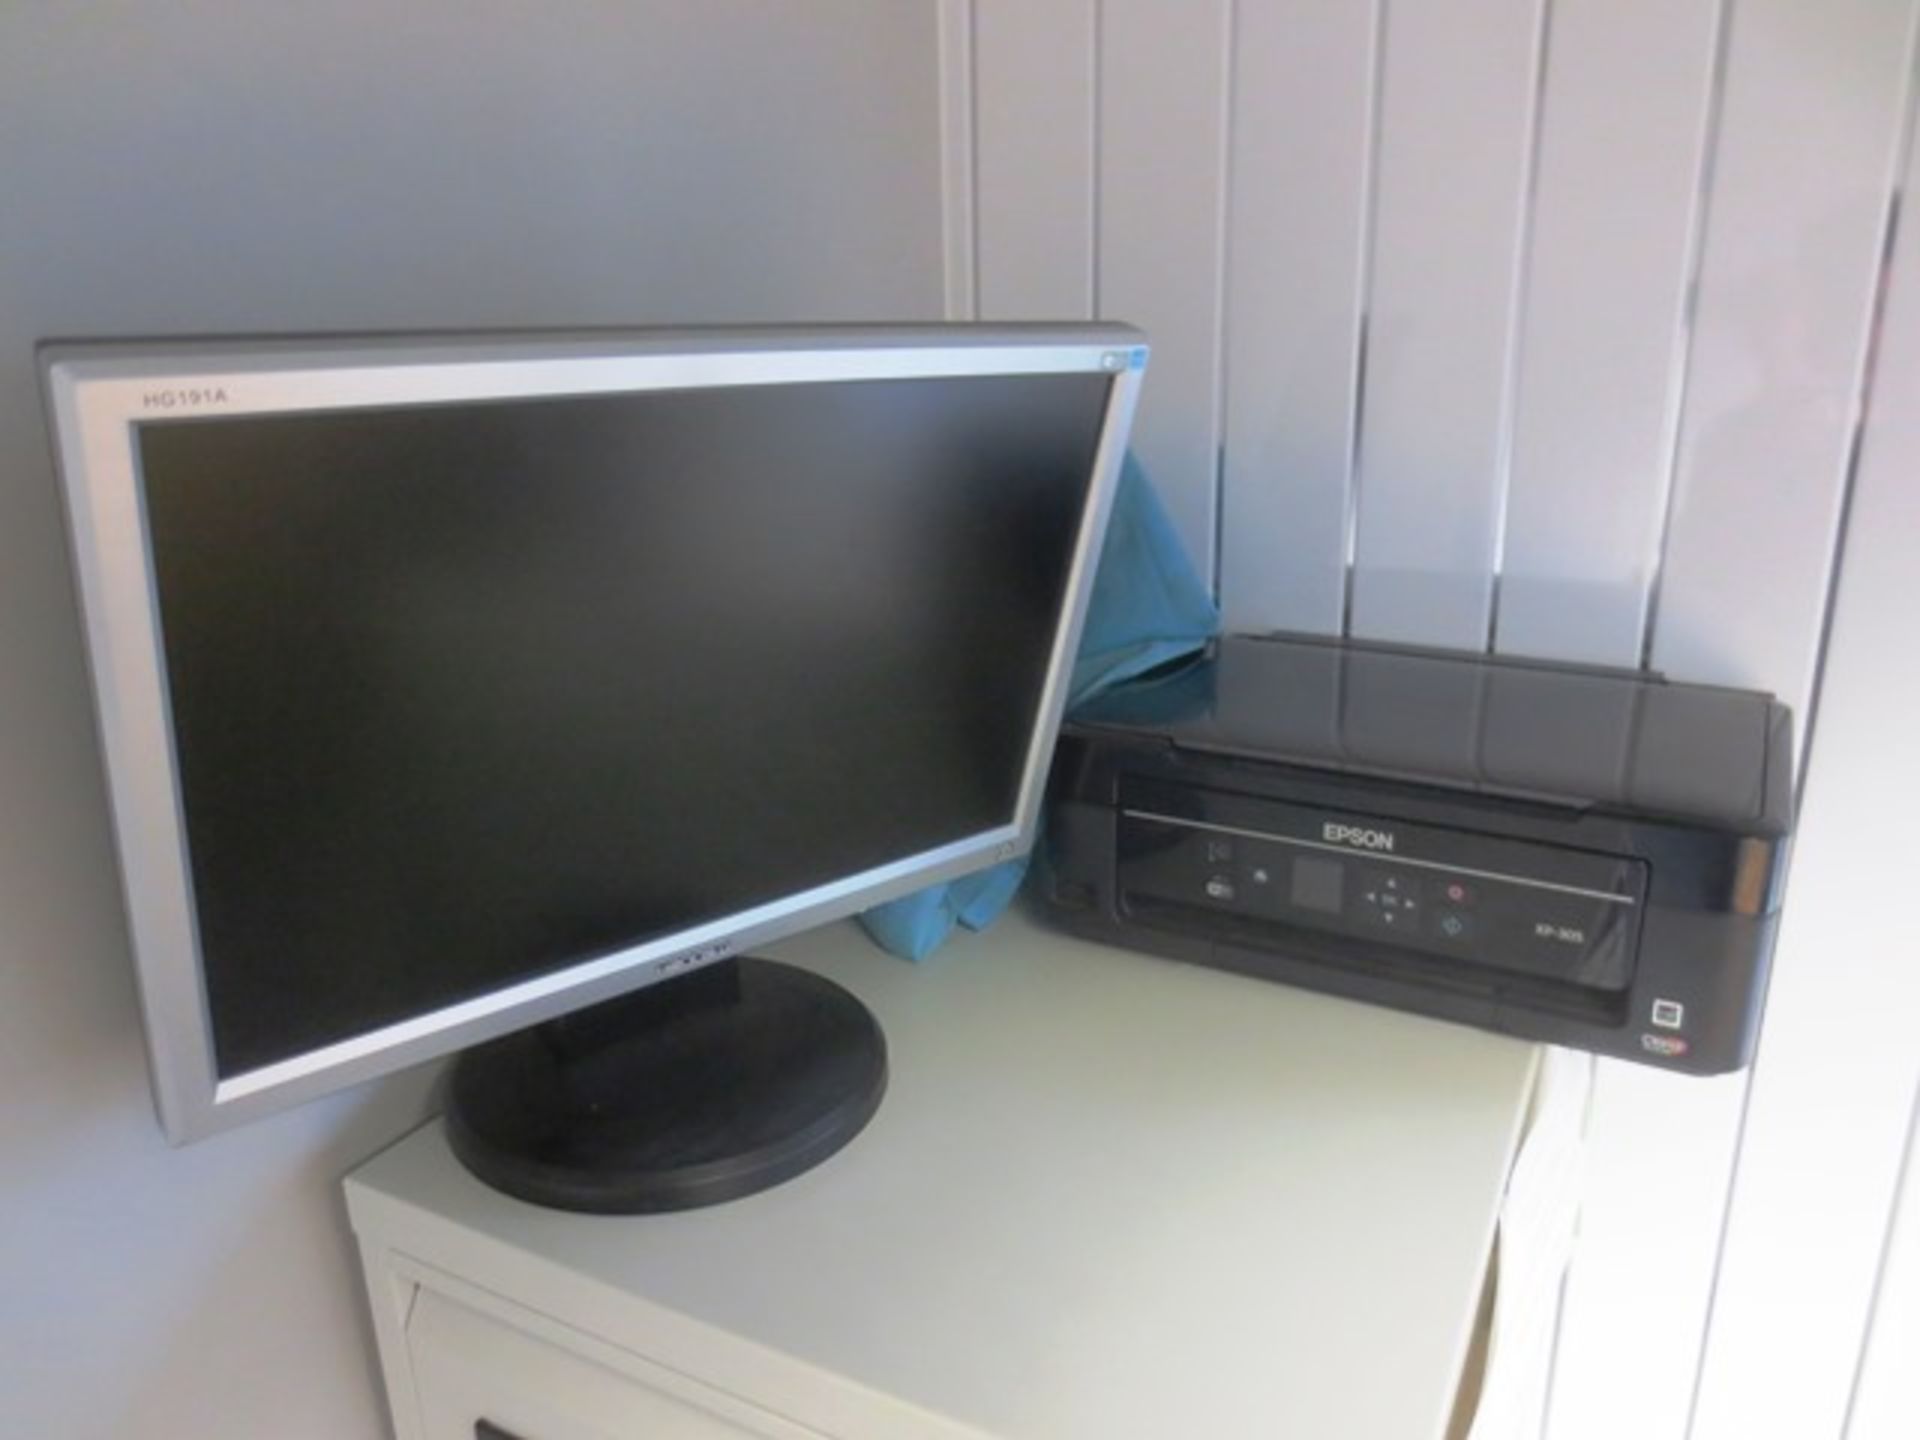 HP Officejet 7310 all-in-one print-scan-fax, Hanns G flat screen monitor, Epson XP305 printer - Image 2 of 2